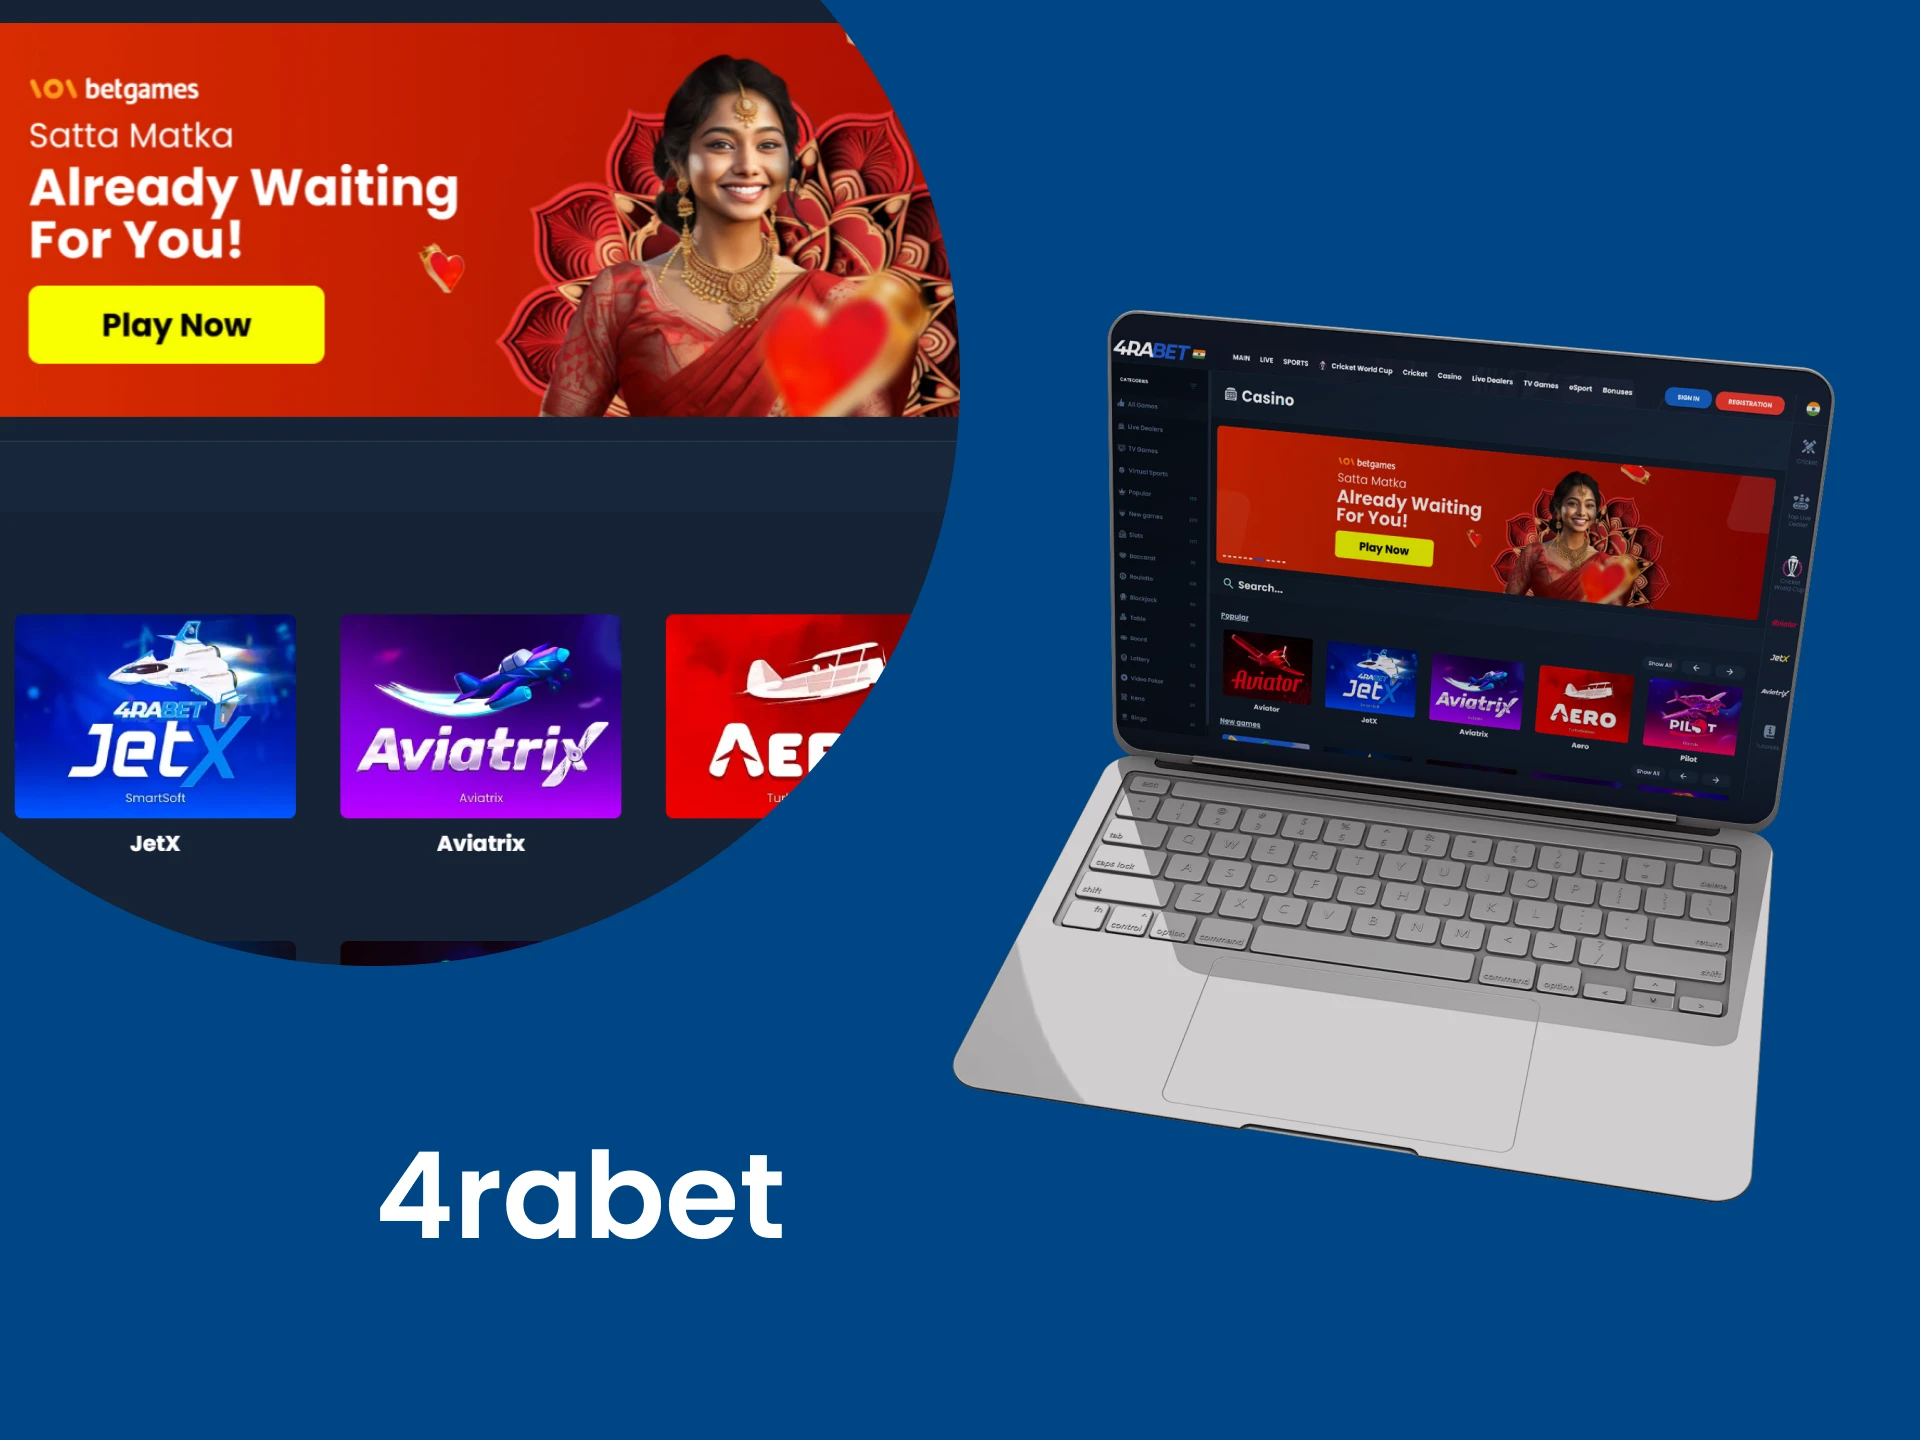 Try your hand at the online casino from 4rabet.